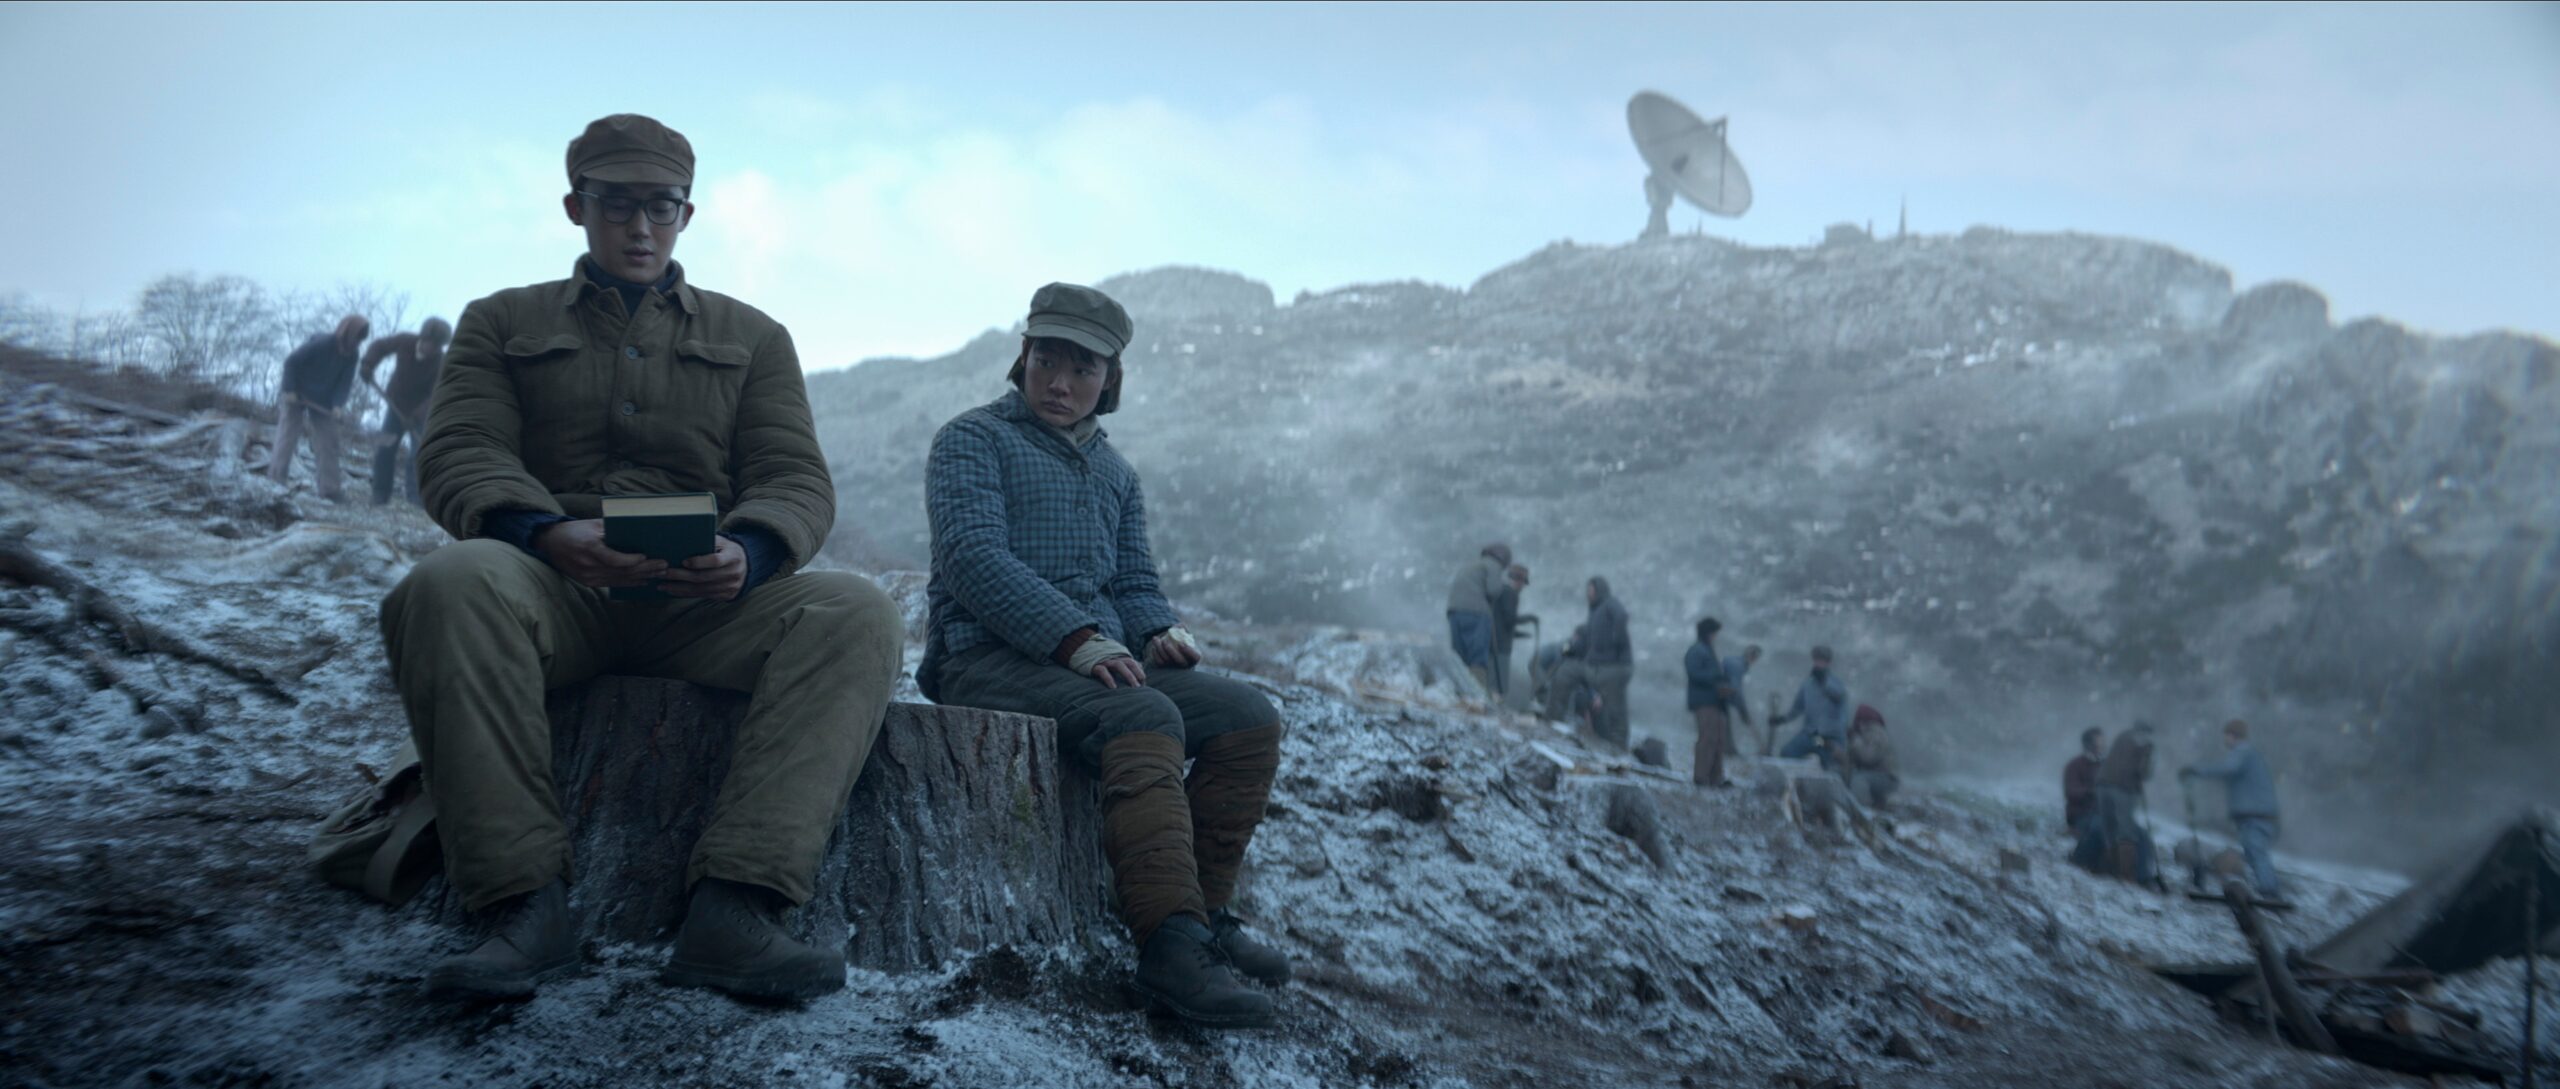 Game of Thrones Showrunners on Making Netflix’s ‘3 Body Problem’ Accessible to Everyone